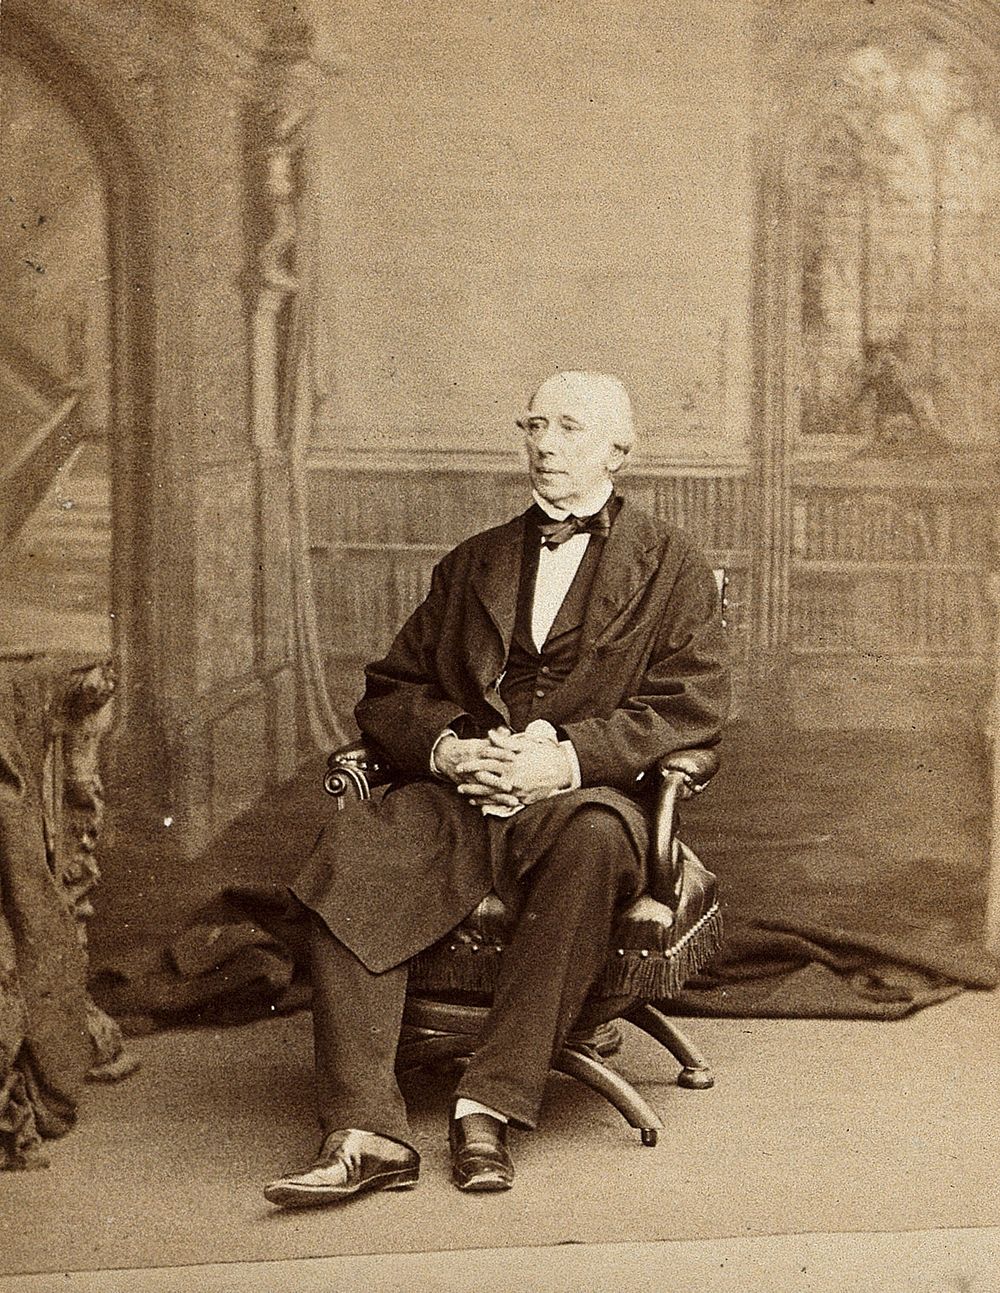 Sir Charles Hastings. Photograph by Ernest Edwards, 1867.